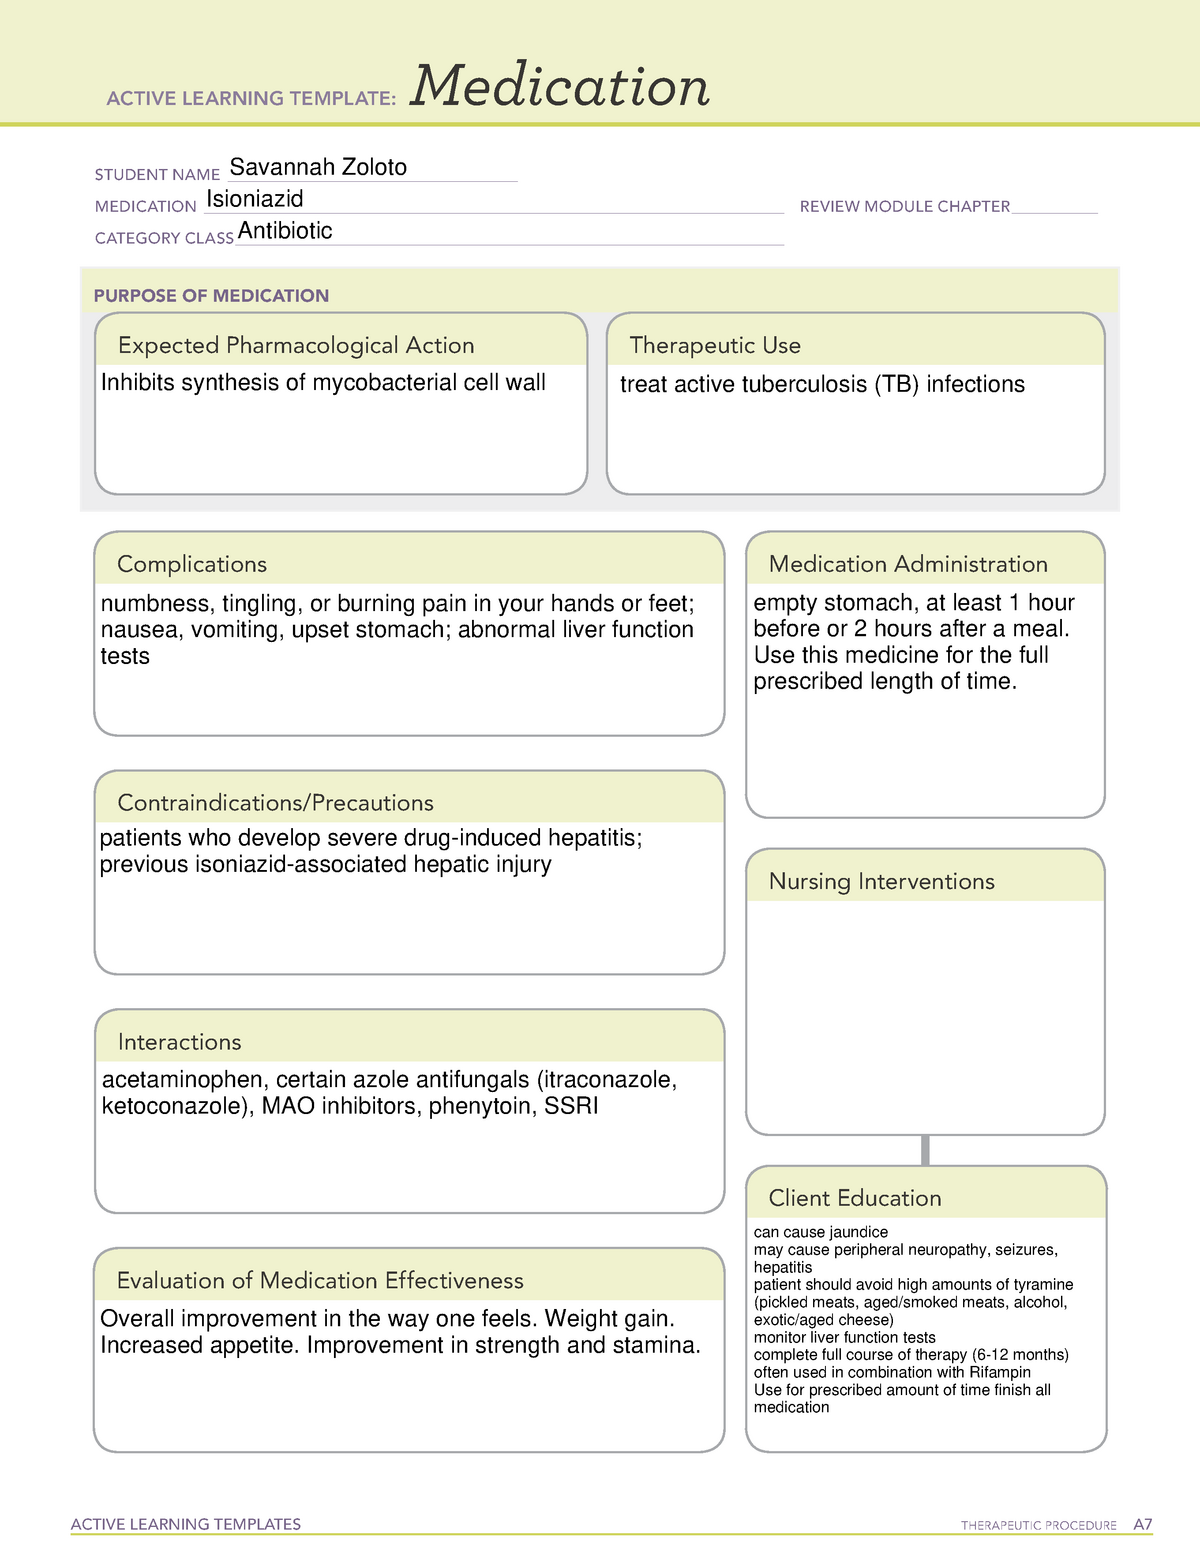 Isoniazid ATI active learning template ACTIVE LEARNING TEMPLATES